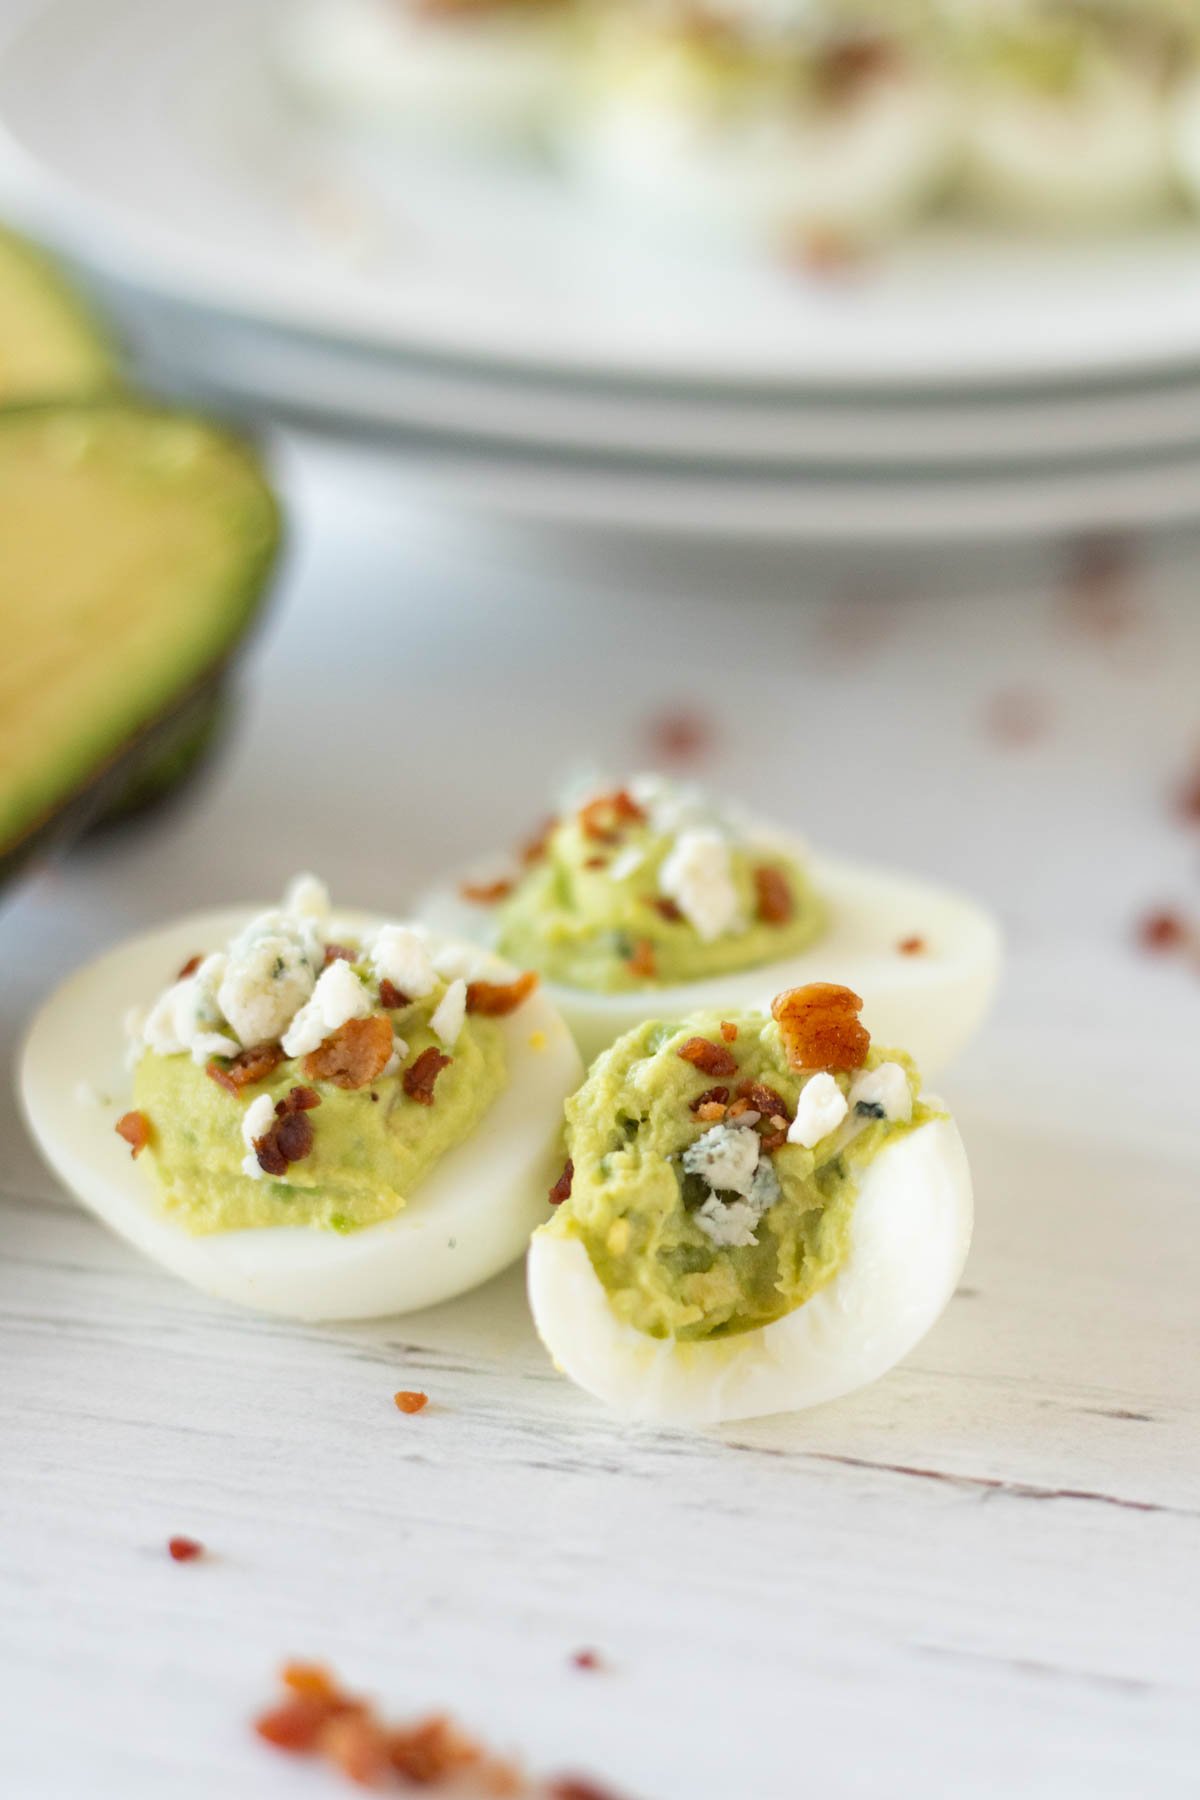 Avocado deviled eggs garnished with crumbled cheese and bacon on a white surface.